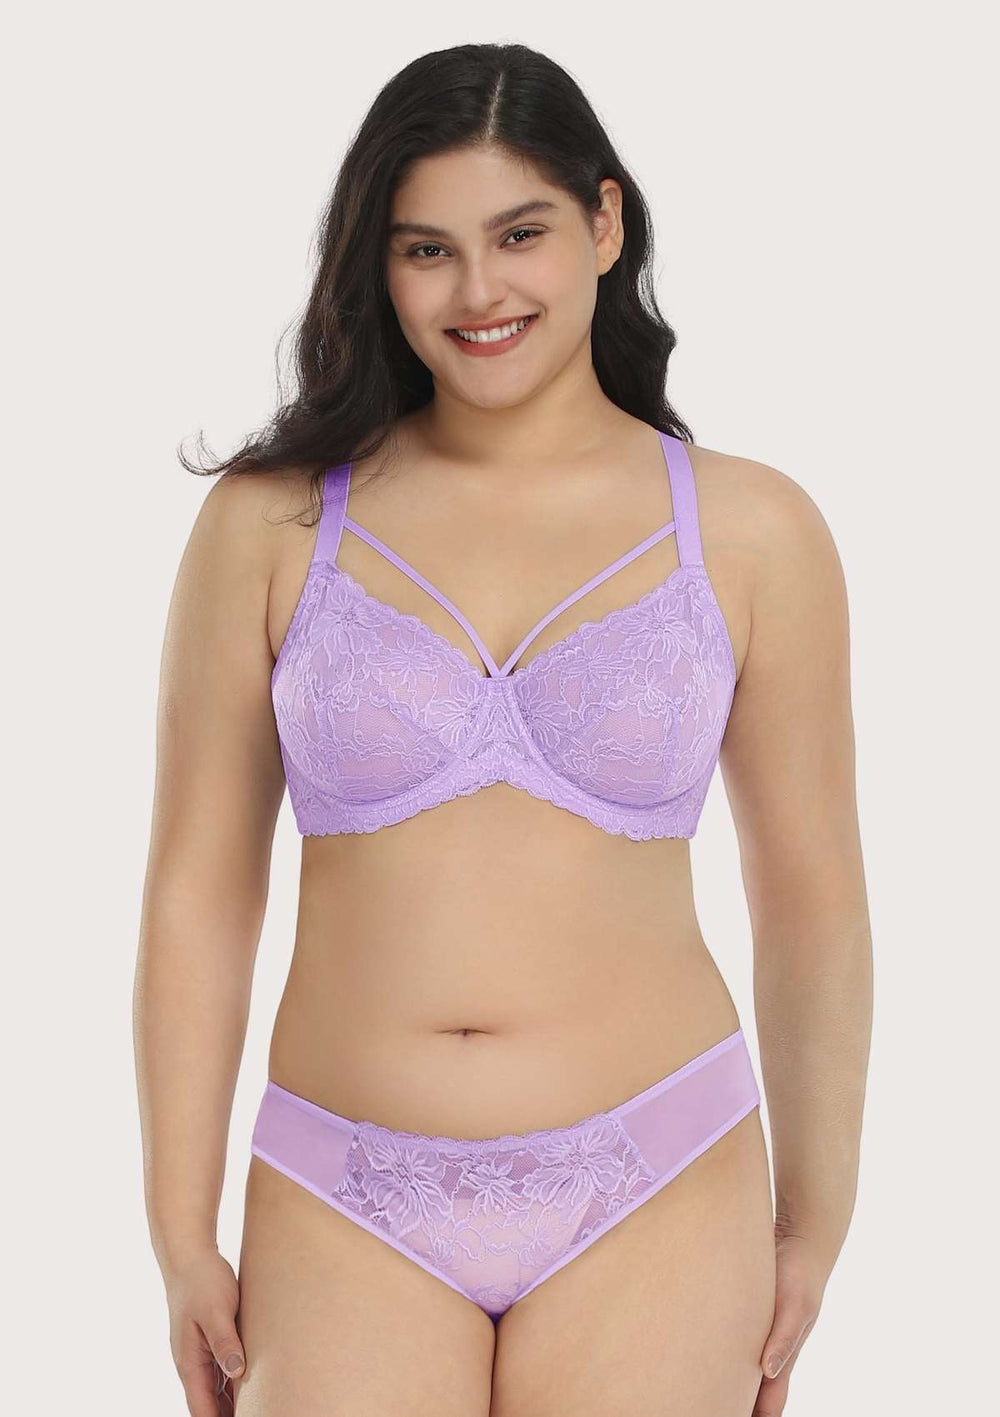 HSIA Pretty In Petals Lace Bra and Panty Set: Non Padded Wired Bra